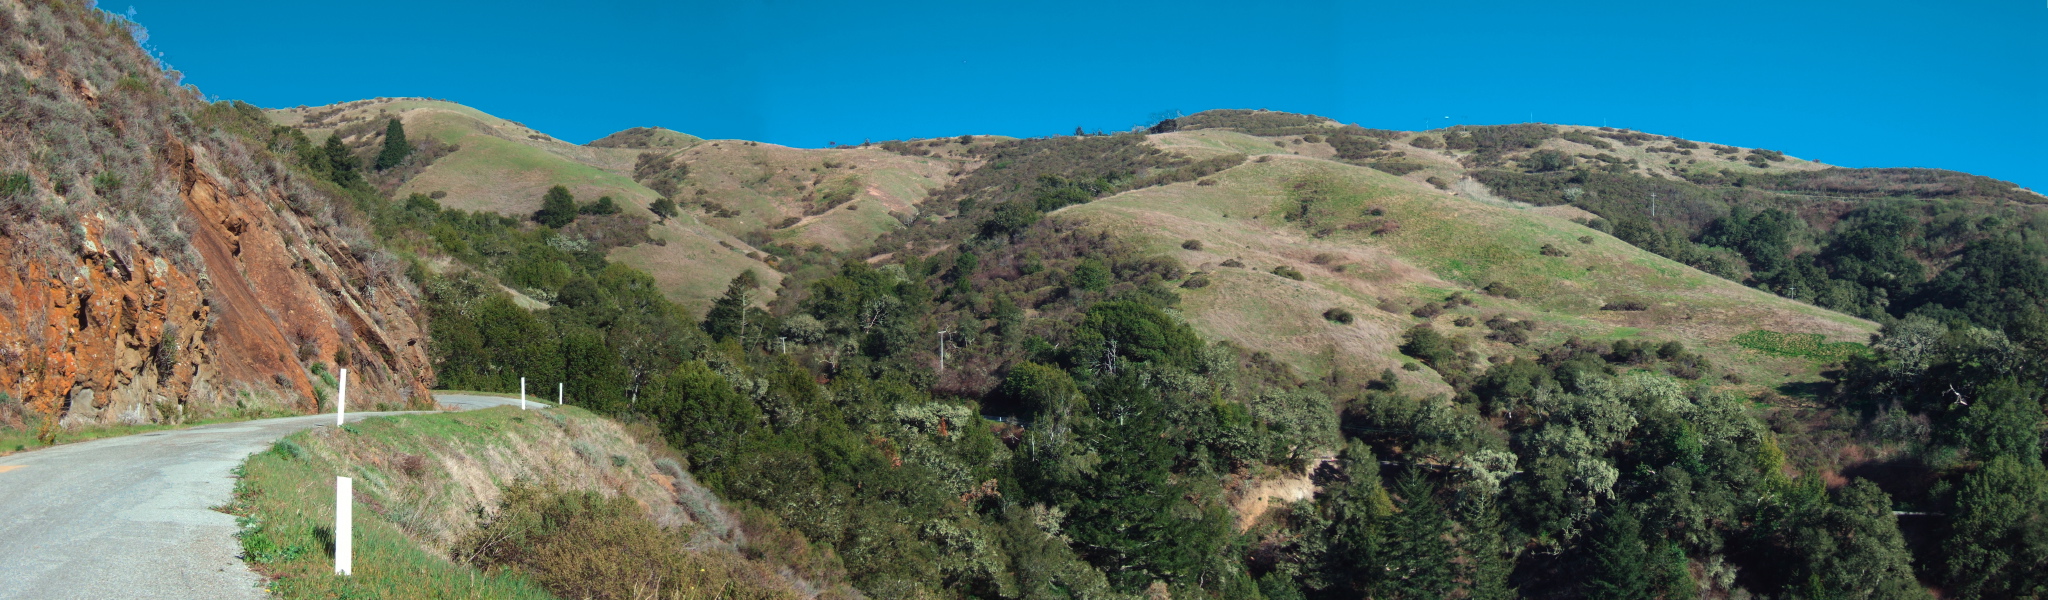 Back side of Windy Hill from Old La Honda Road